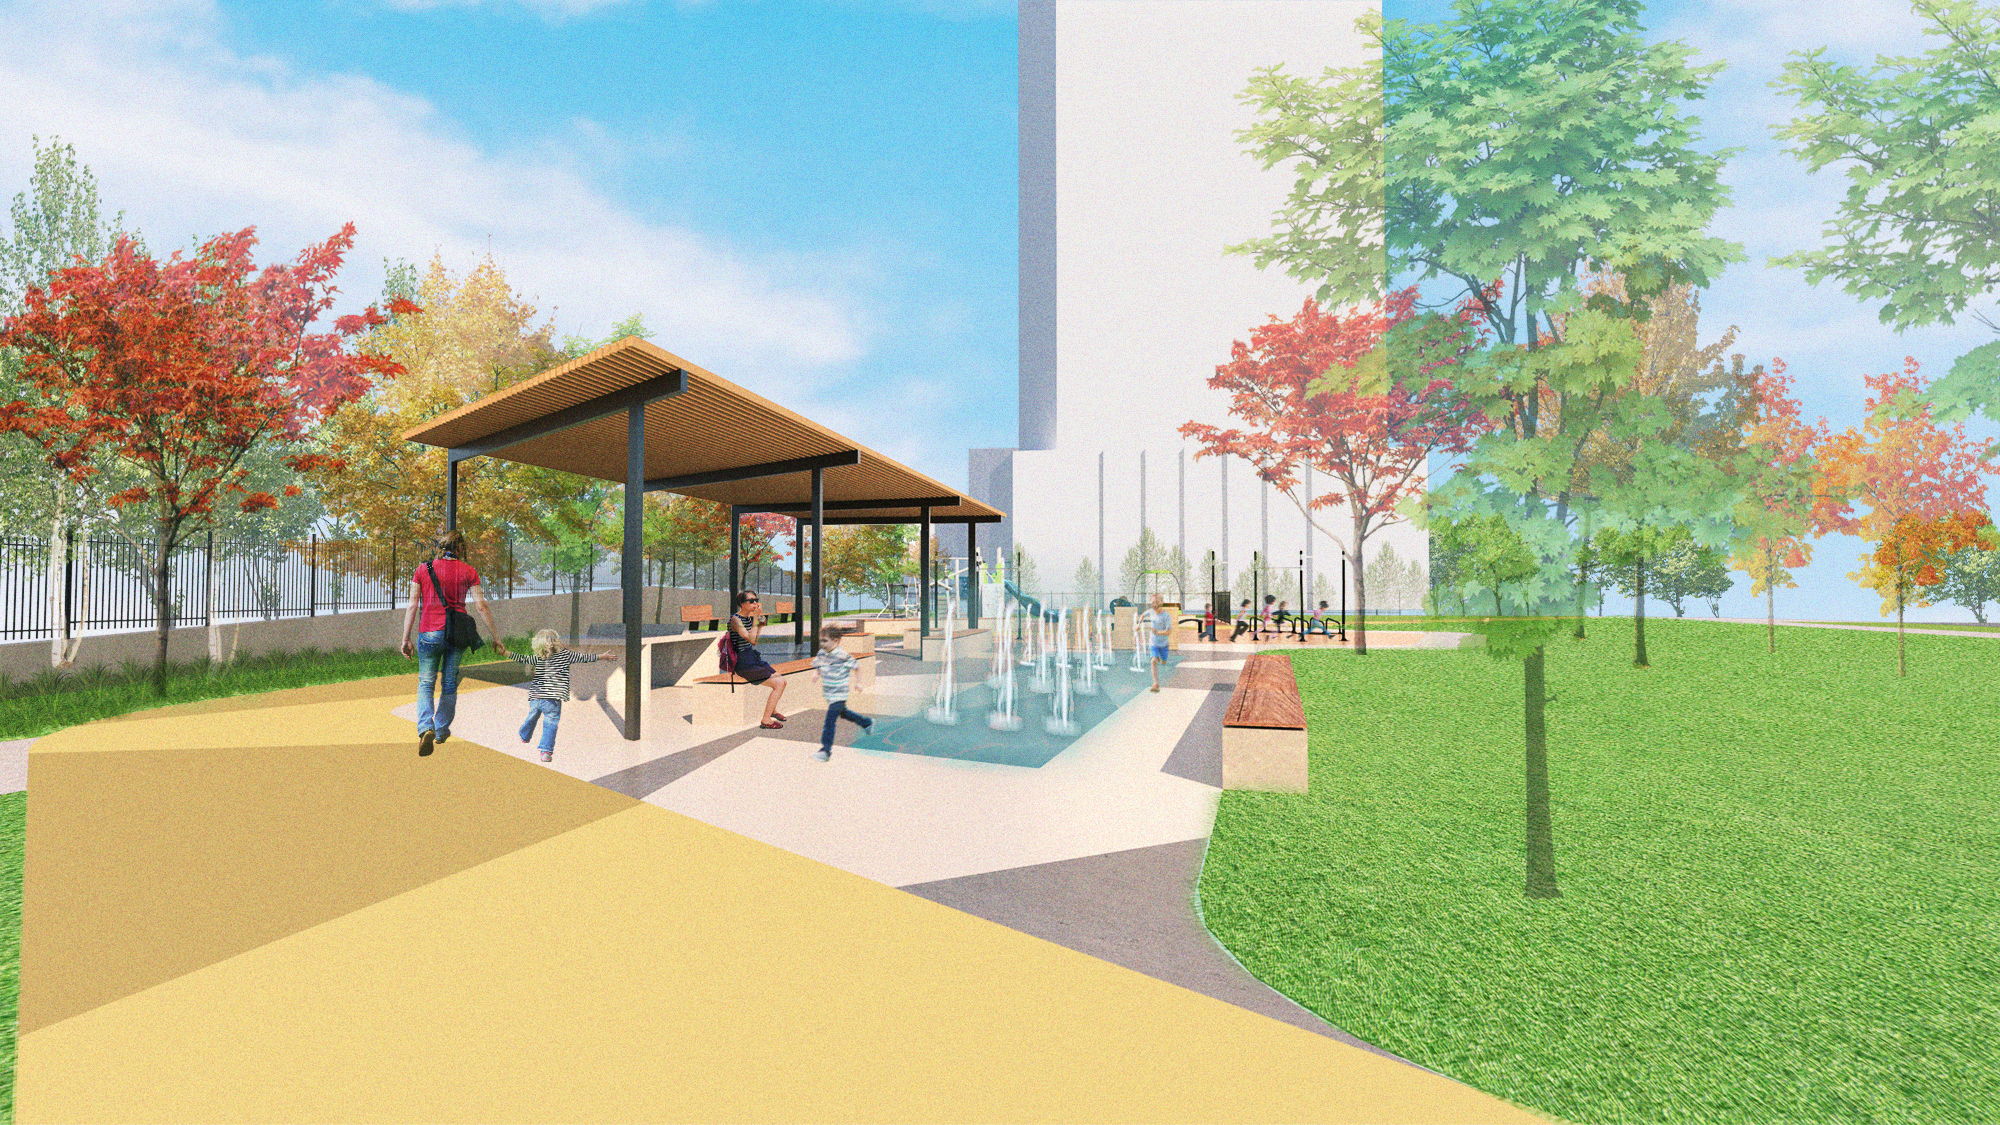 A rendering of the central pavilion. Surrounding the interactive water feature are proposed benches and chairs with trees to provide shading. The background shows the proposed fitness area.